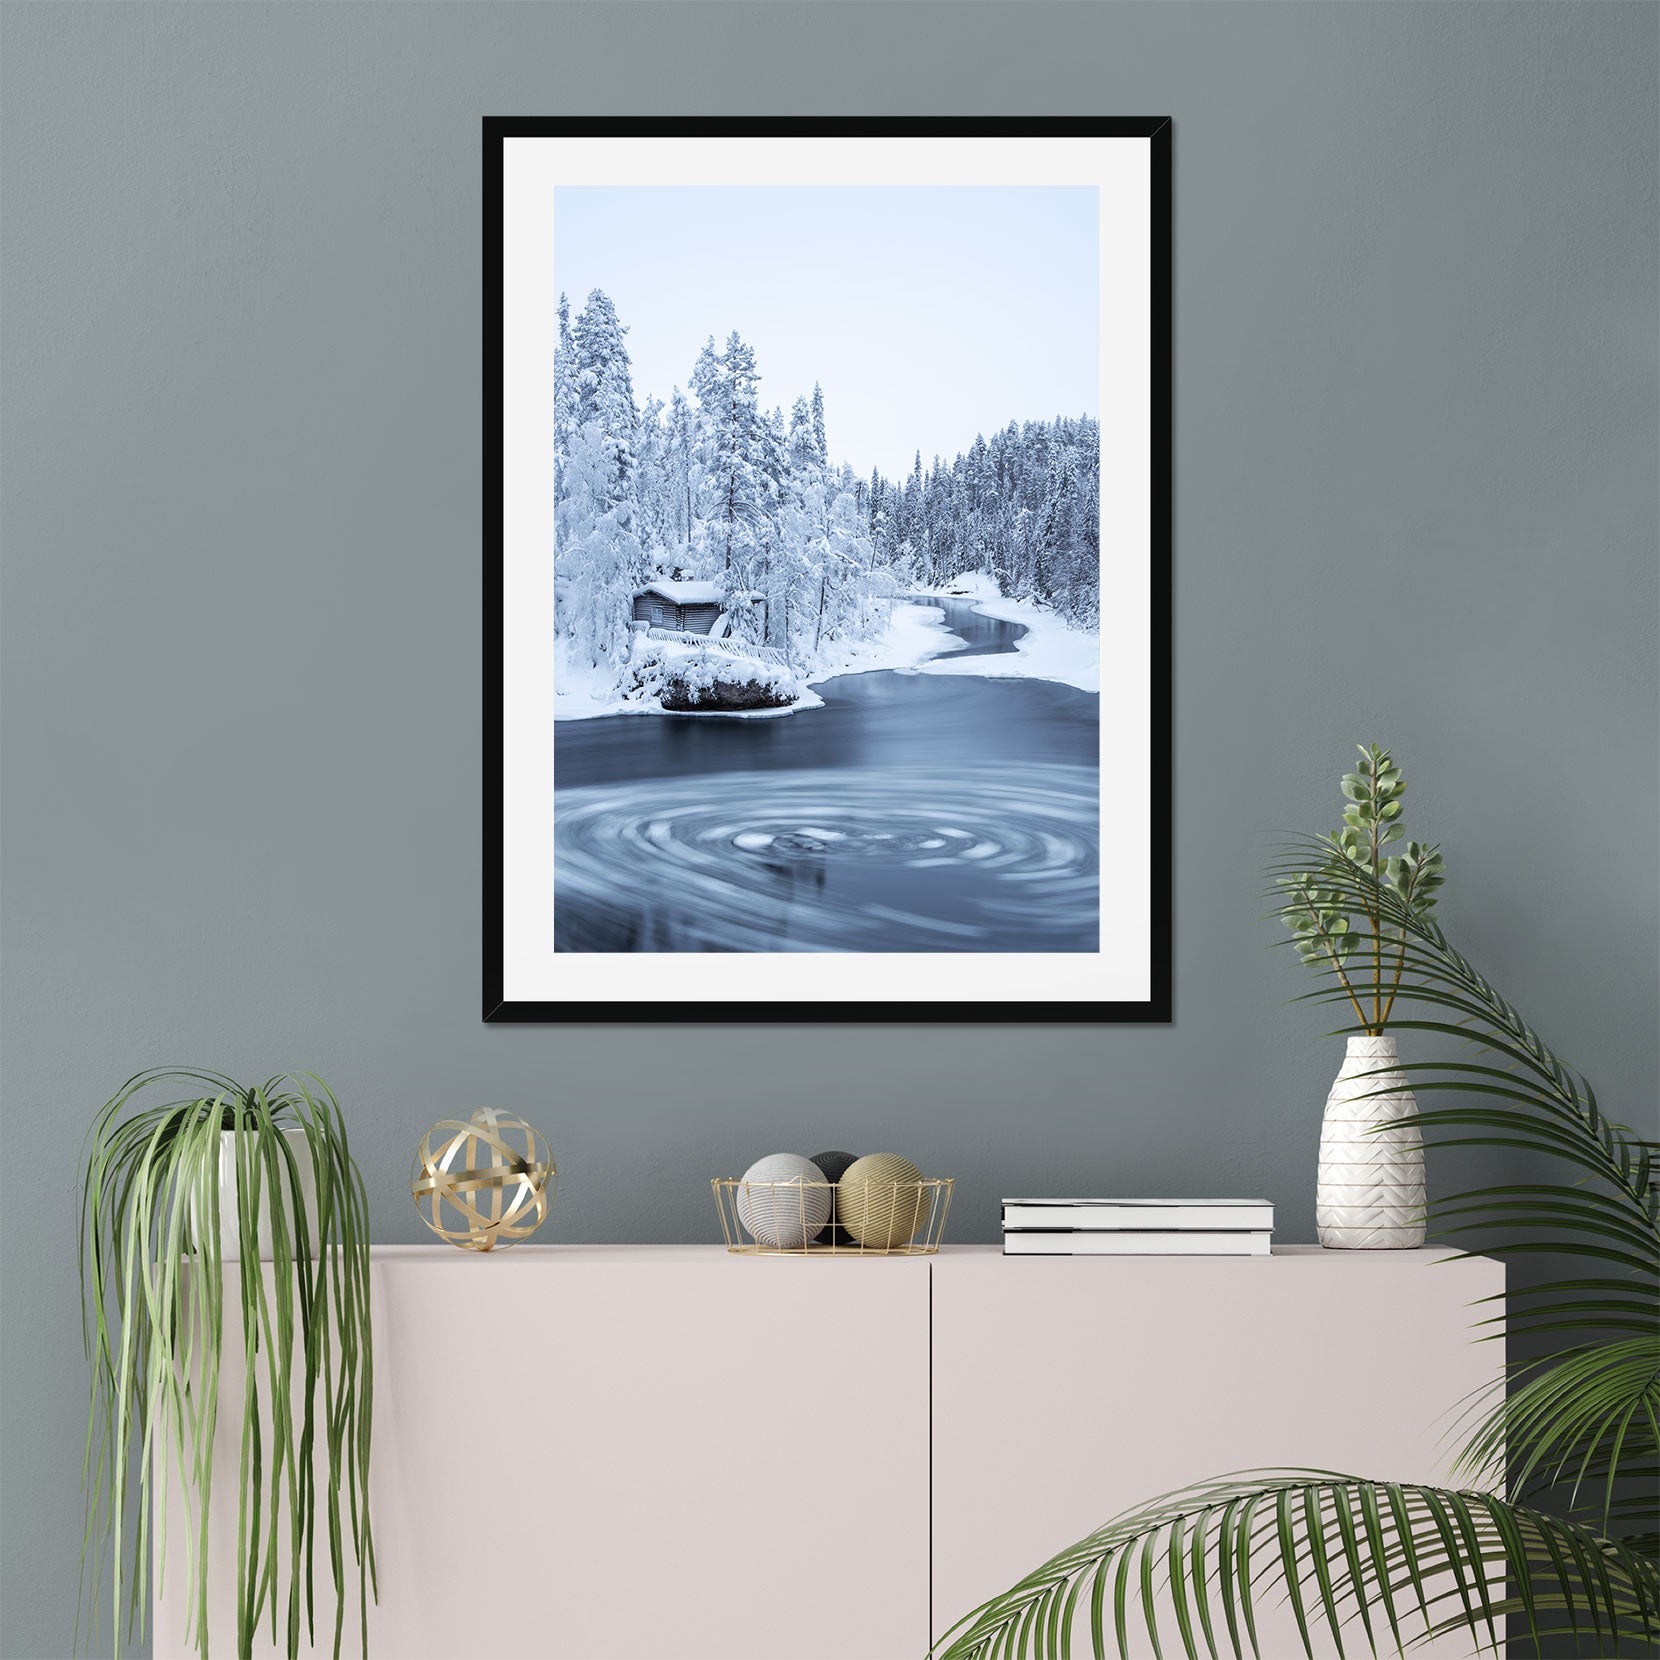 A framed print of a wooden hut in winter forest